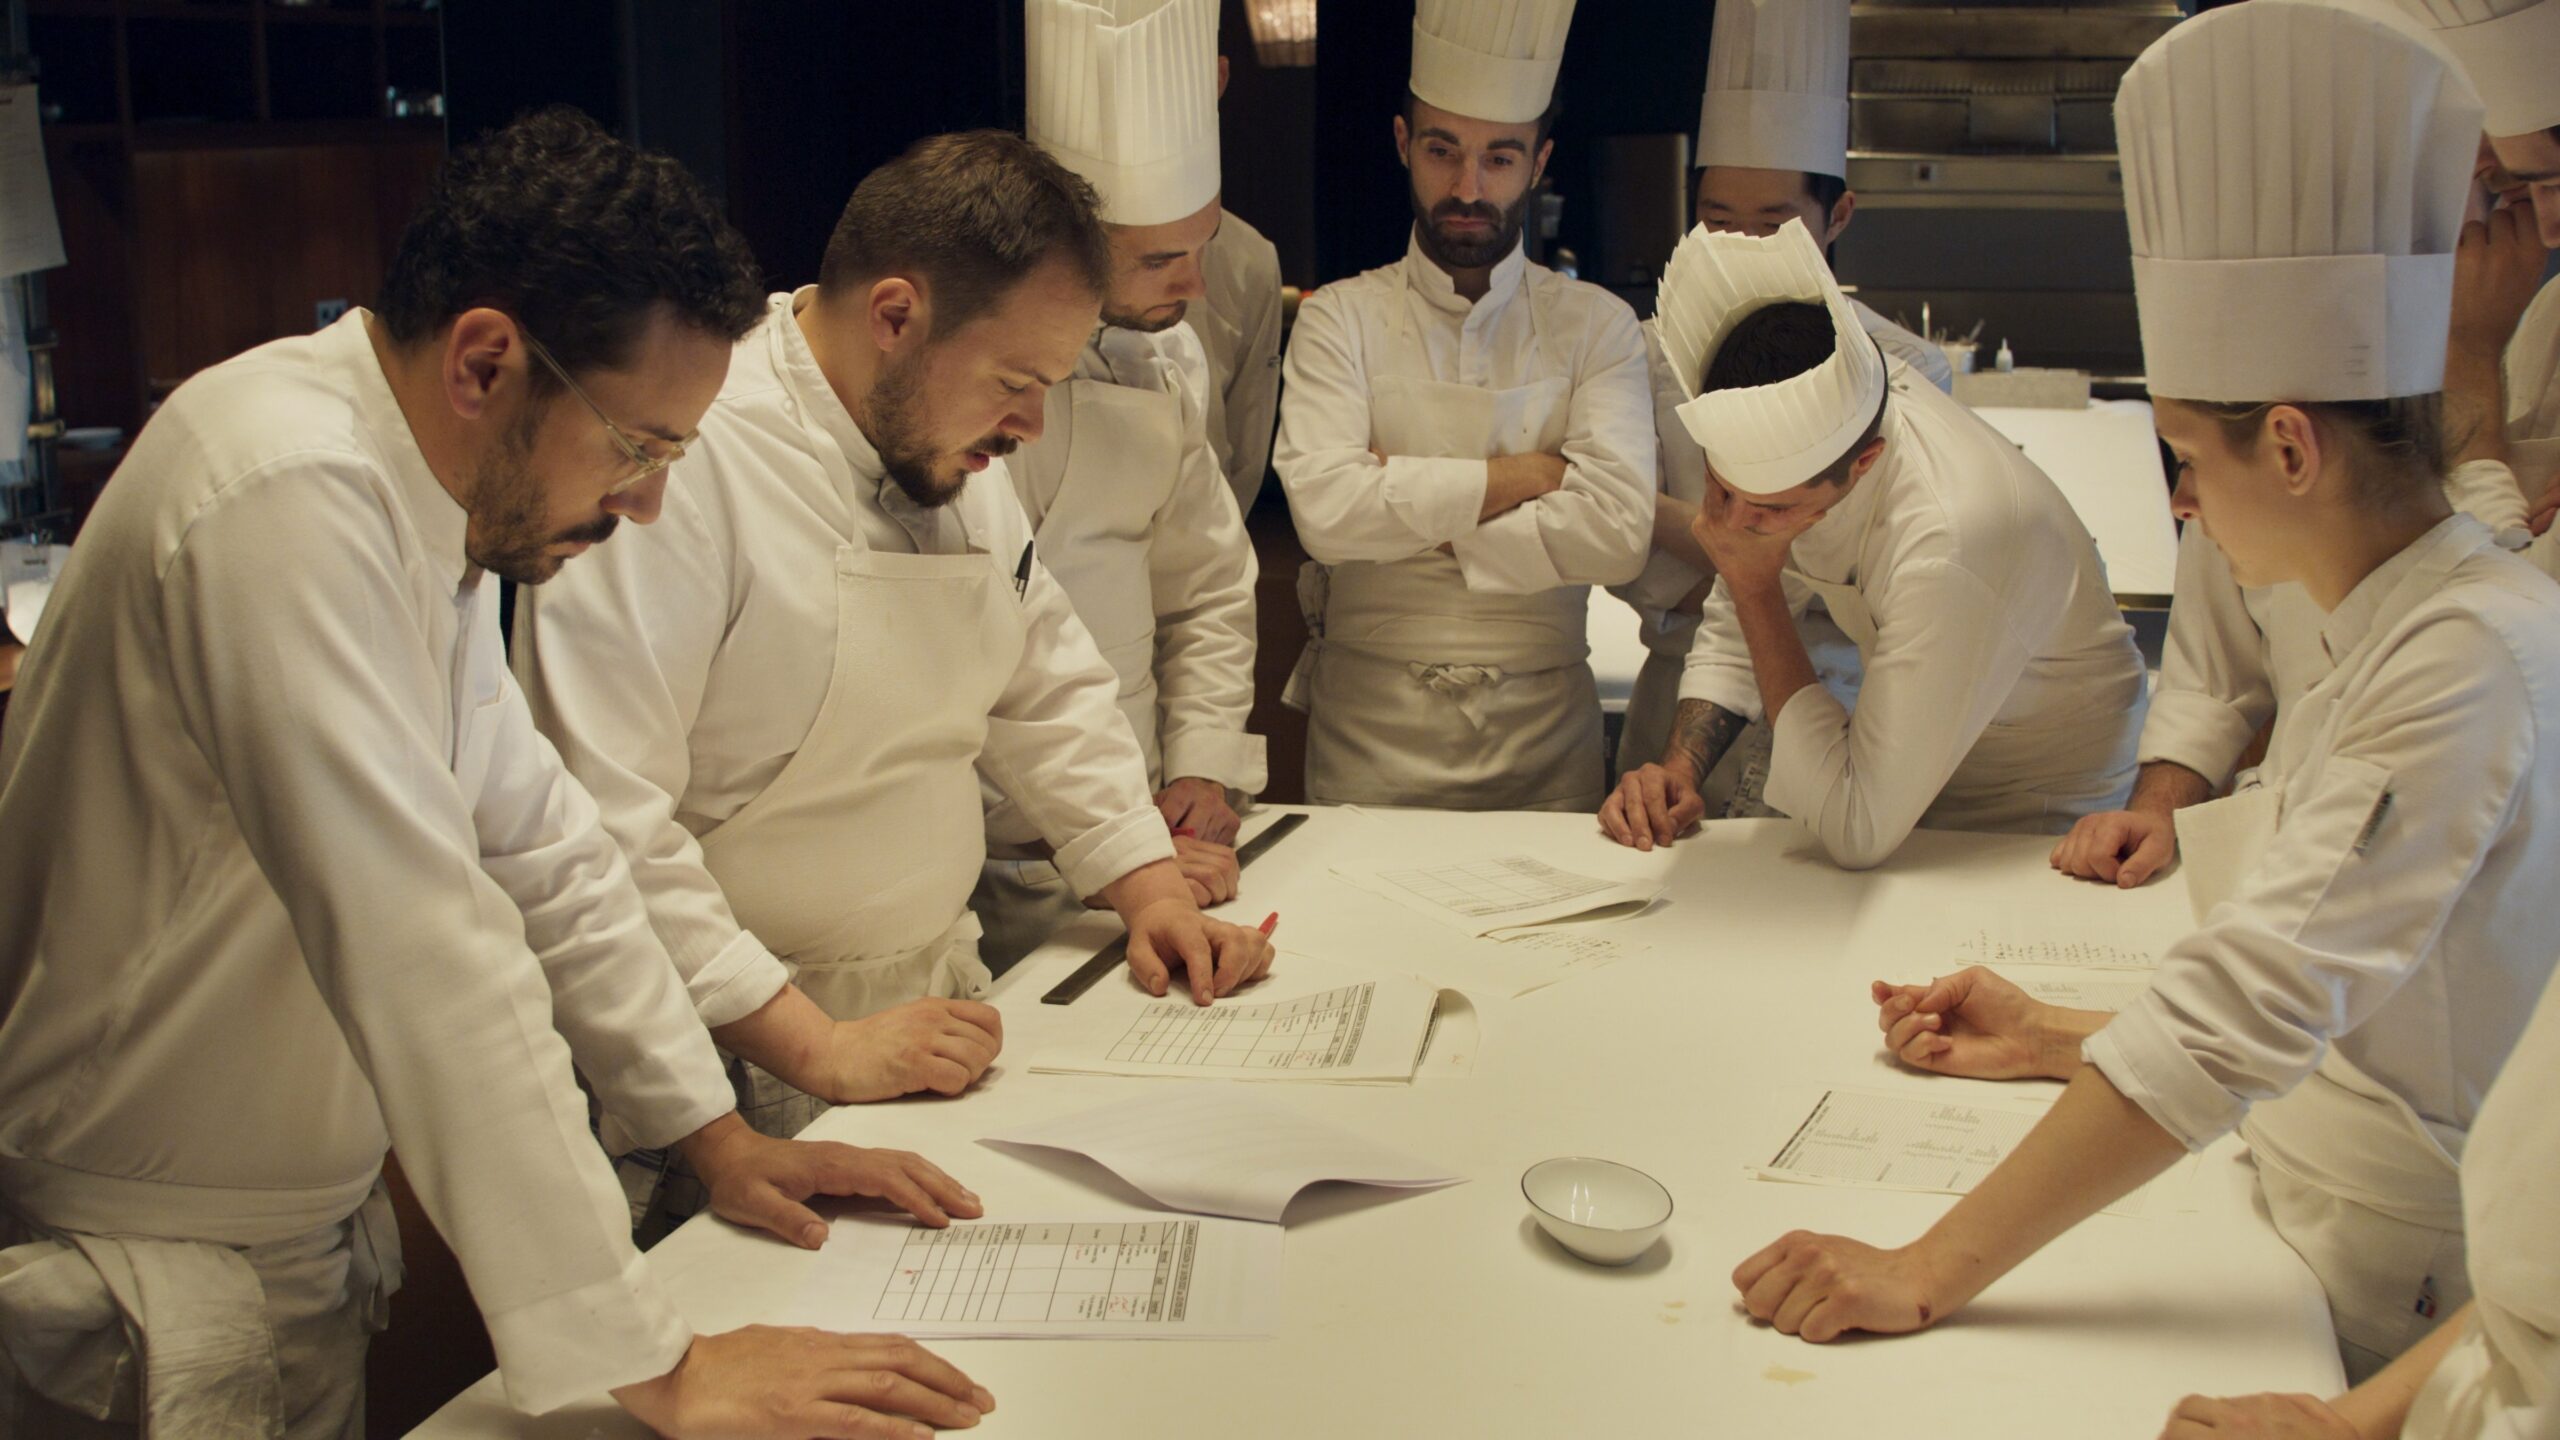 A group of chefs gather around a table.